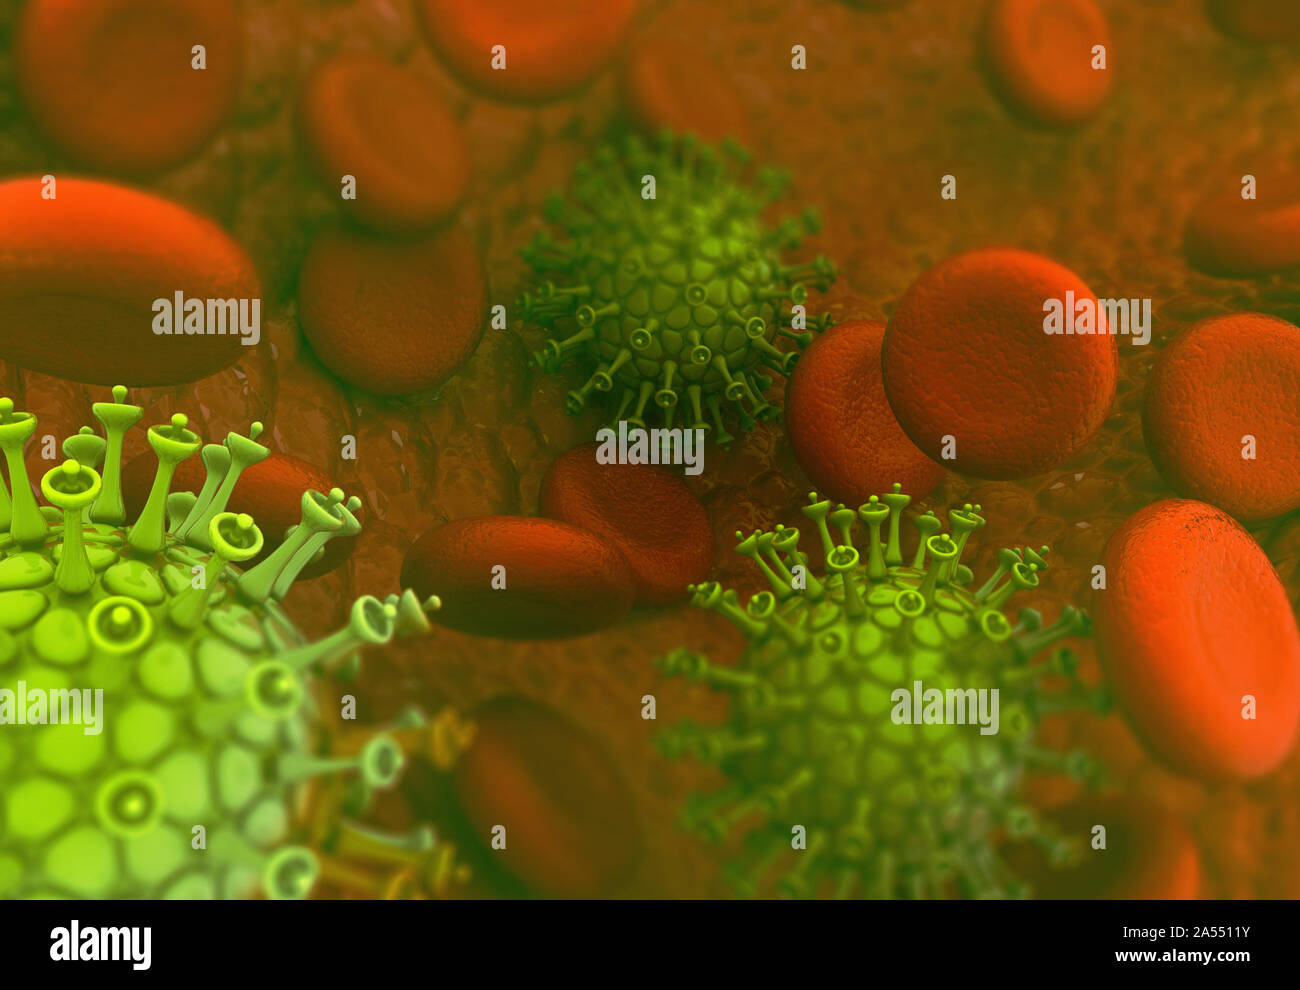 Virus infecting the blood cells. 3d illustration Stock Photo